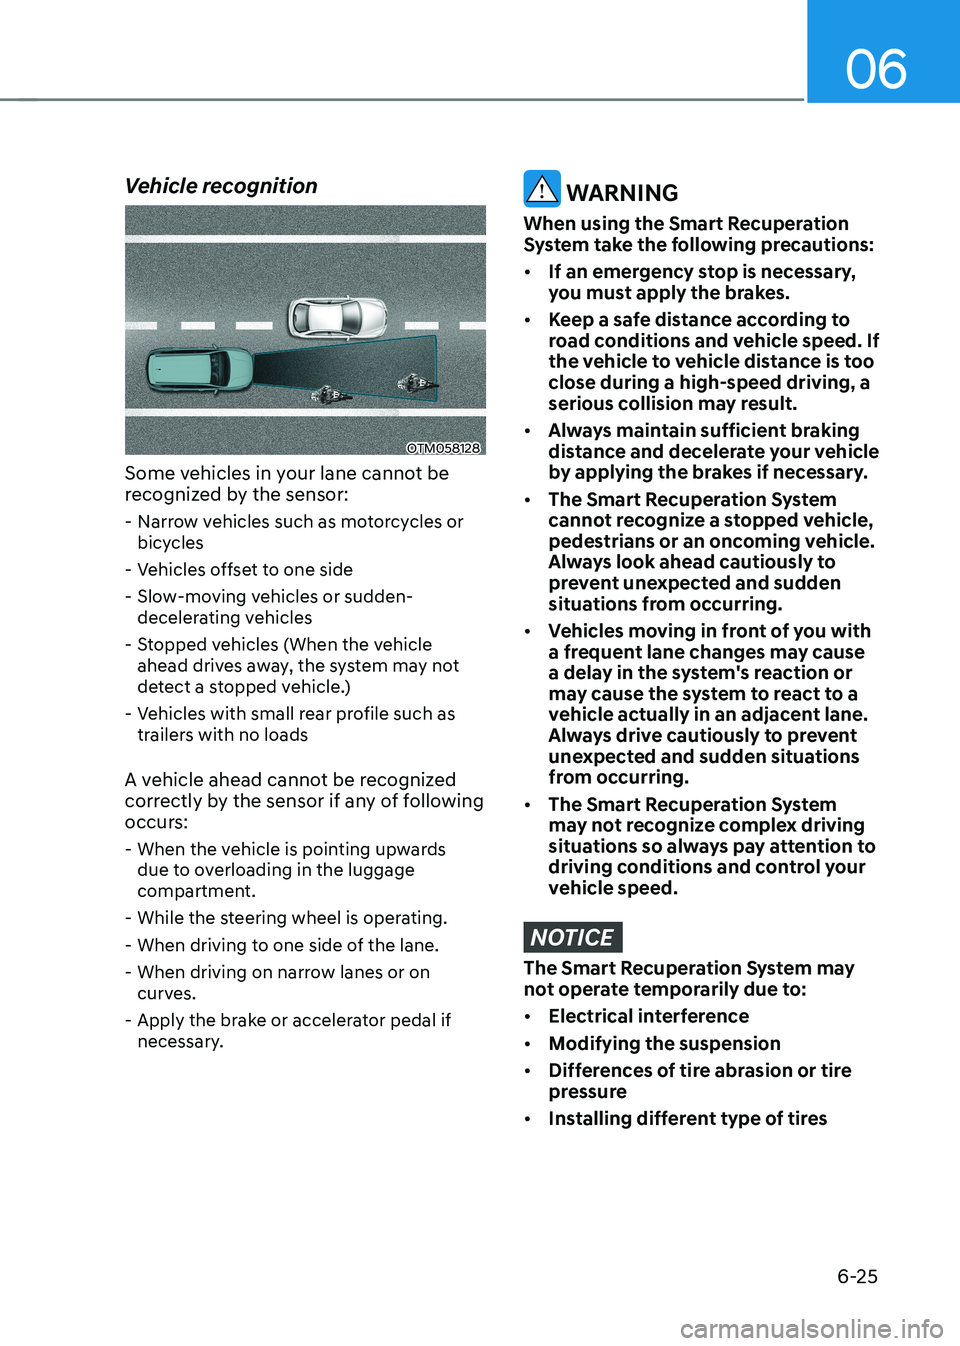 HYUNDAI IONIQ 5 2023  Owners Manual 06
6-25
Vehicle recognition
OTM058128
Some vehicles in your lane cannot be  
recognized by the sensor:  - Narrow vehicles such as motorcycles or bicycles
 - Vehicles offset to one side 
 - Slow-moving